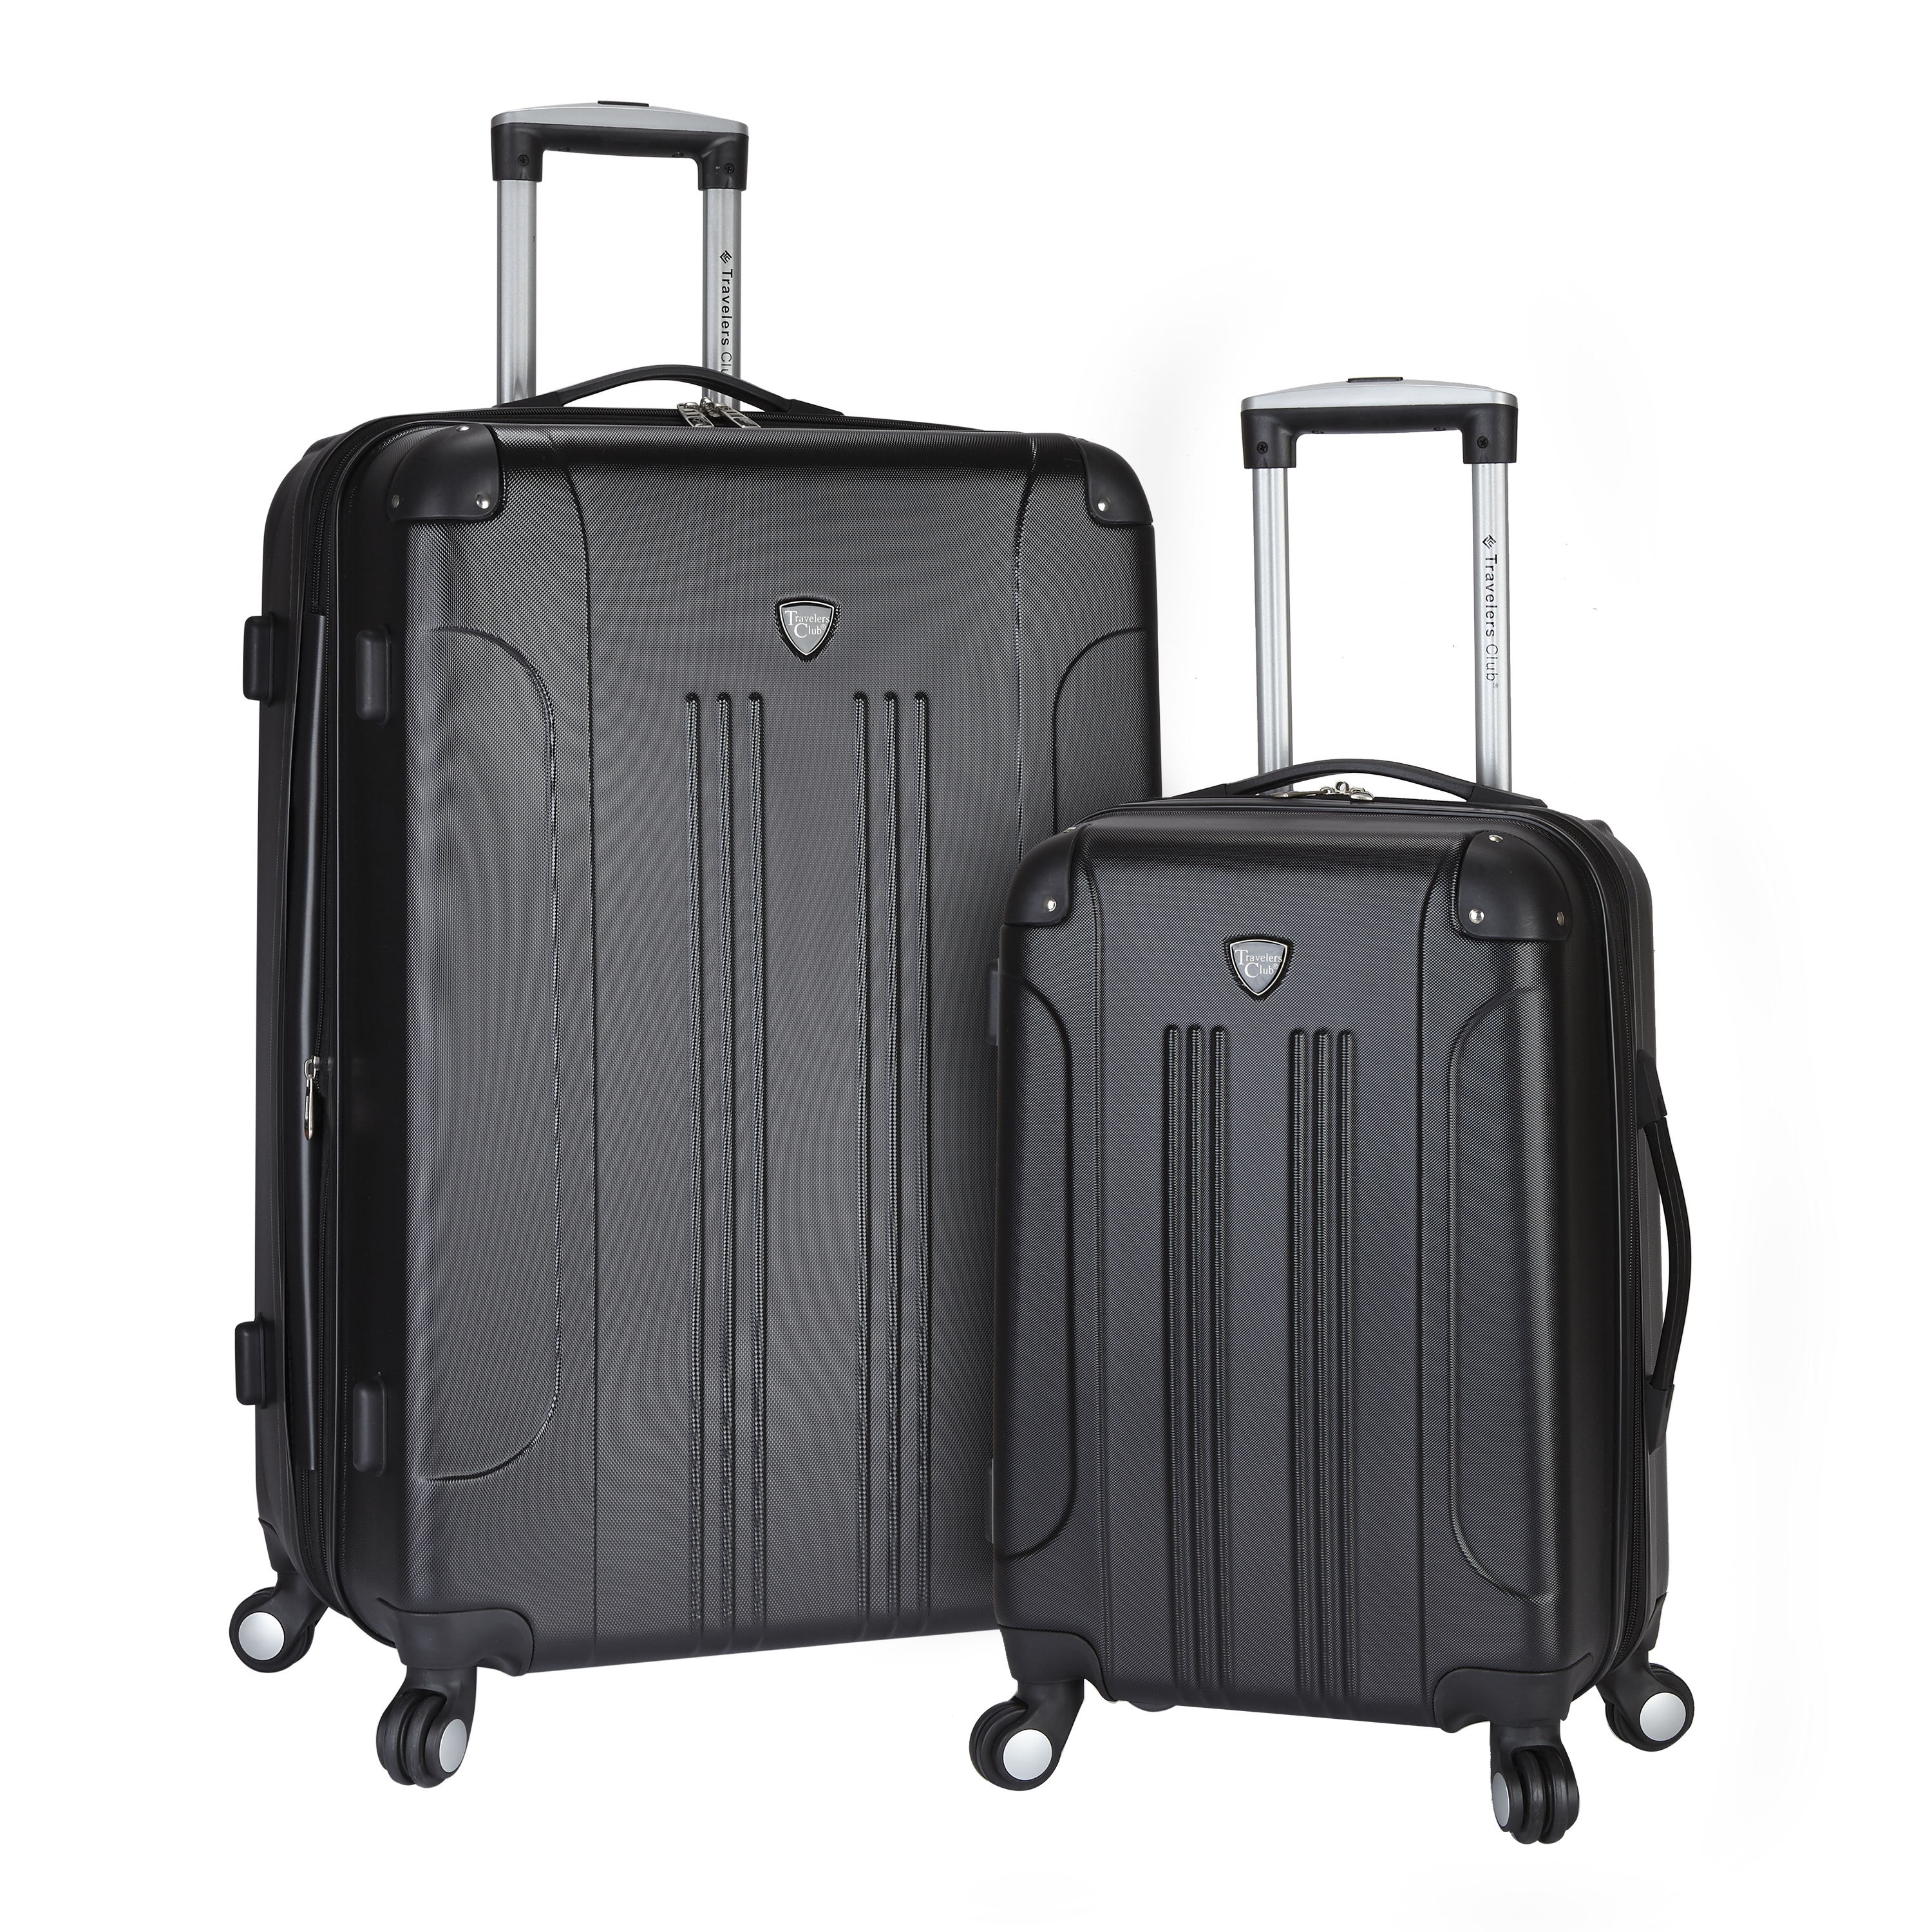 Hs-66902-001 Chicago 2 Piece Hardside Abs Expandable Spinner Luggage Set, Black